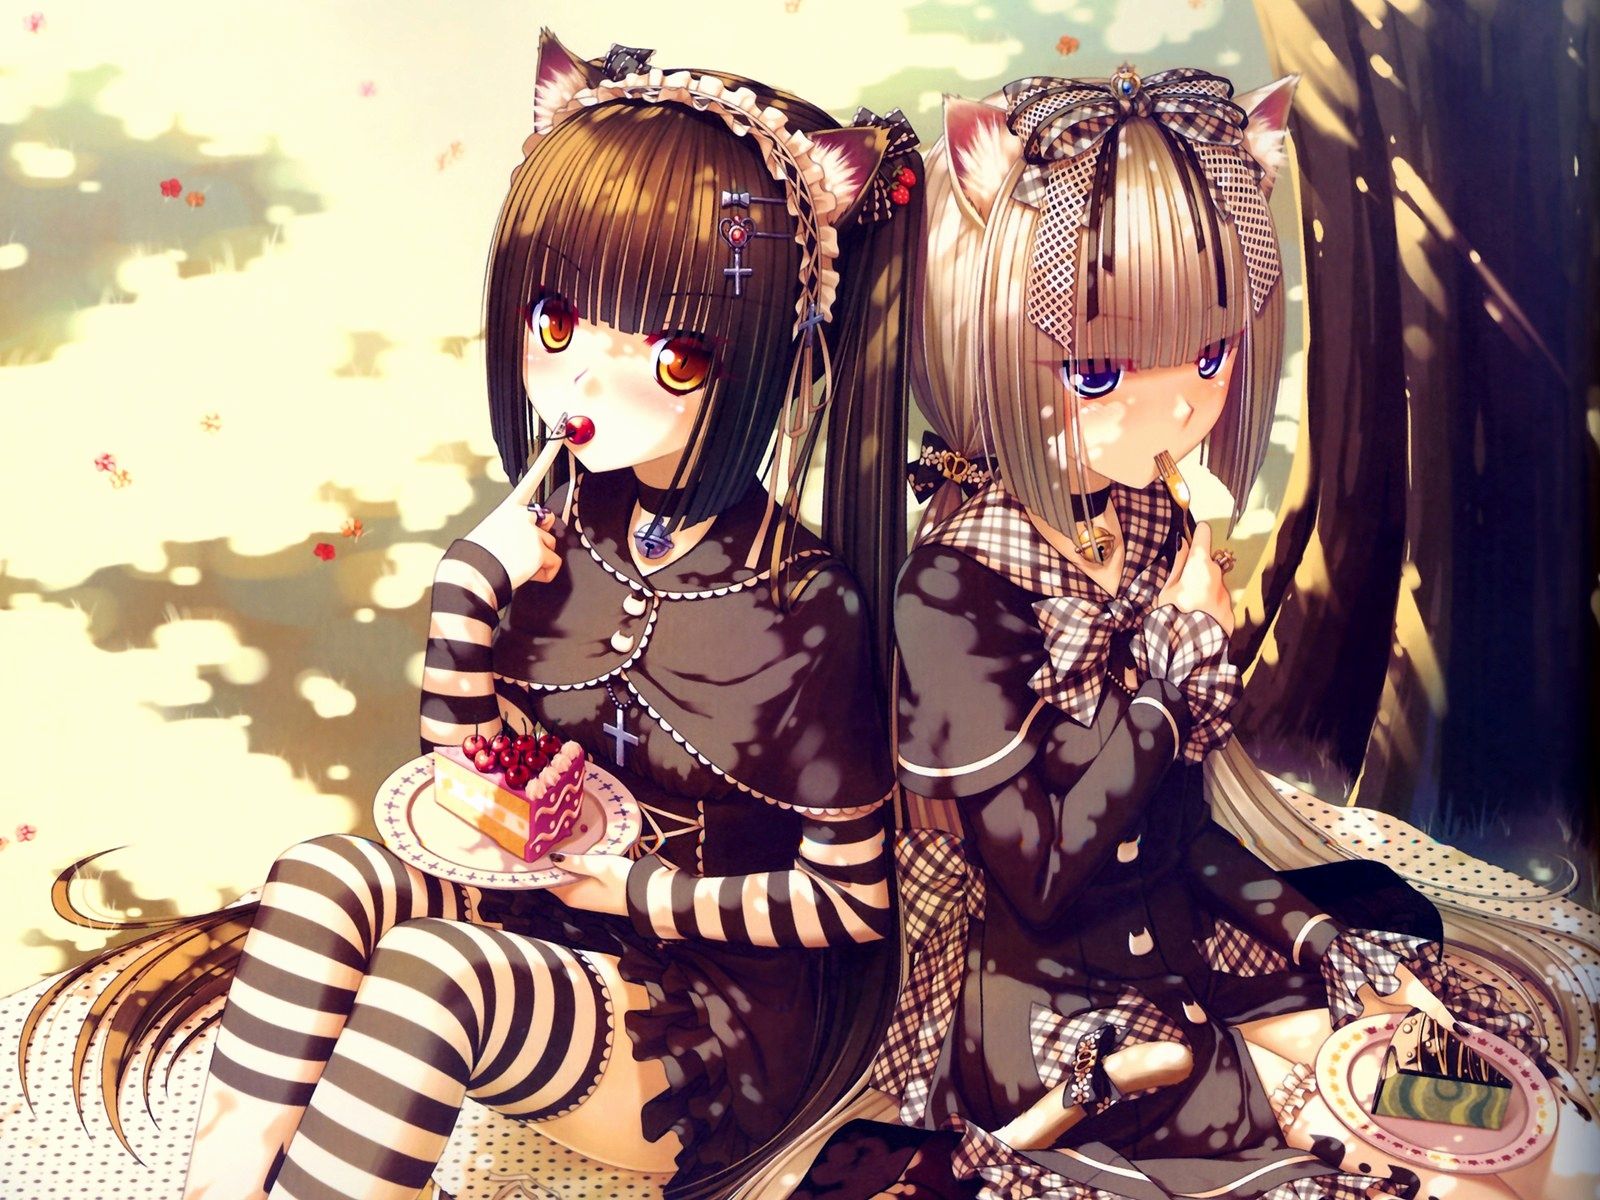 Cute Anime Picture Unique 40 Full HD Cute Anime Wallpaper for Desktop This Week of The Hudson